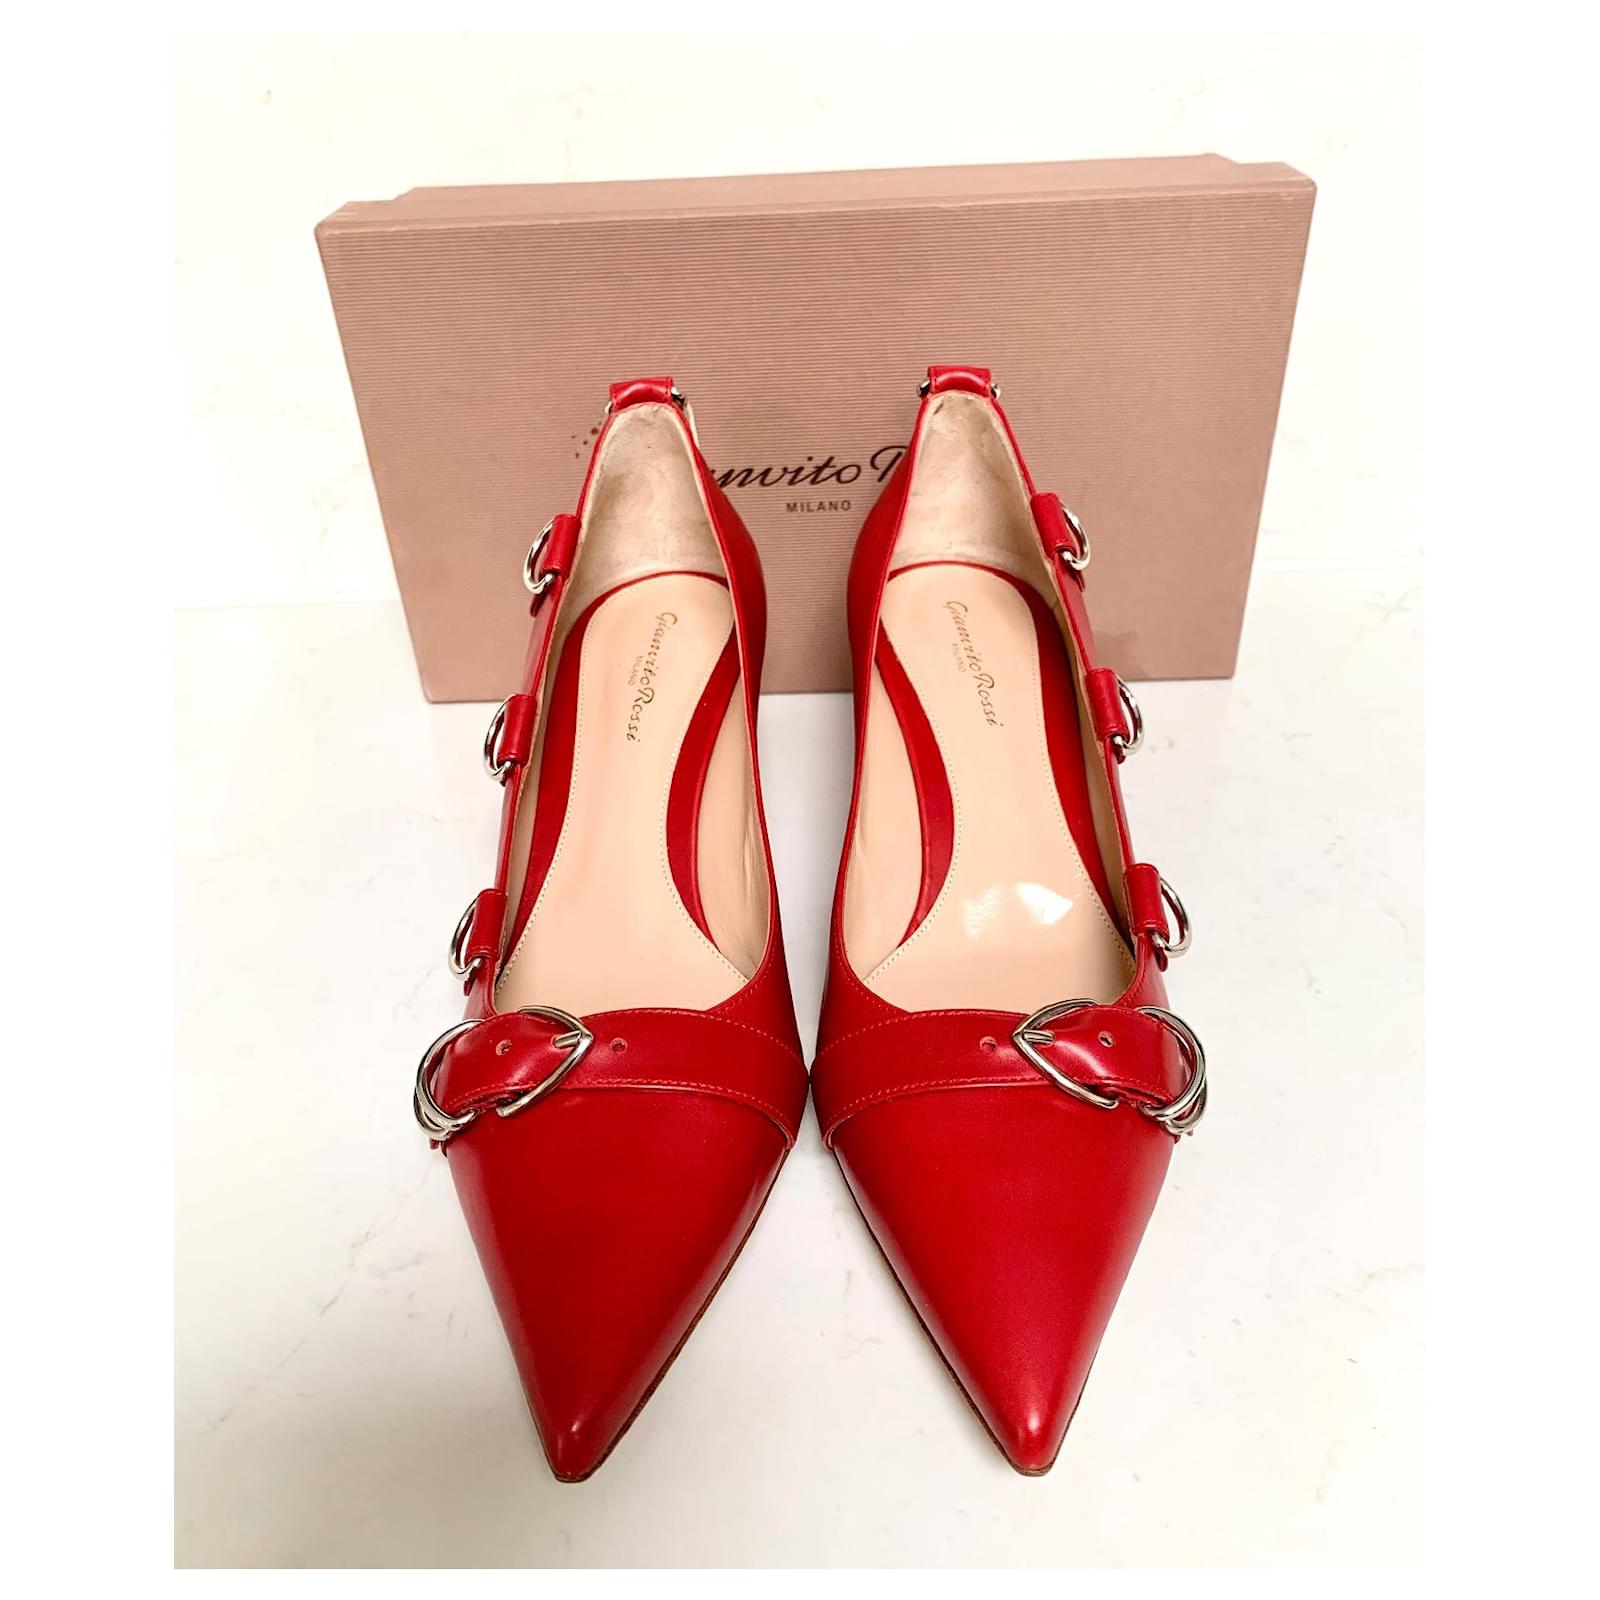 Gianvito Rossi high-heeled pumps - Red